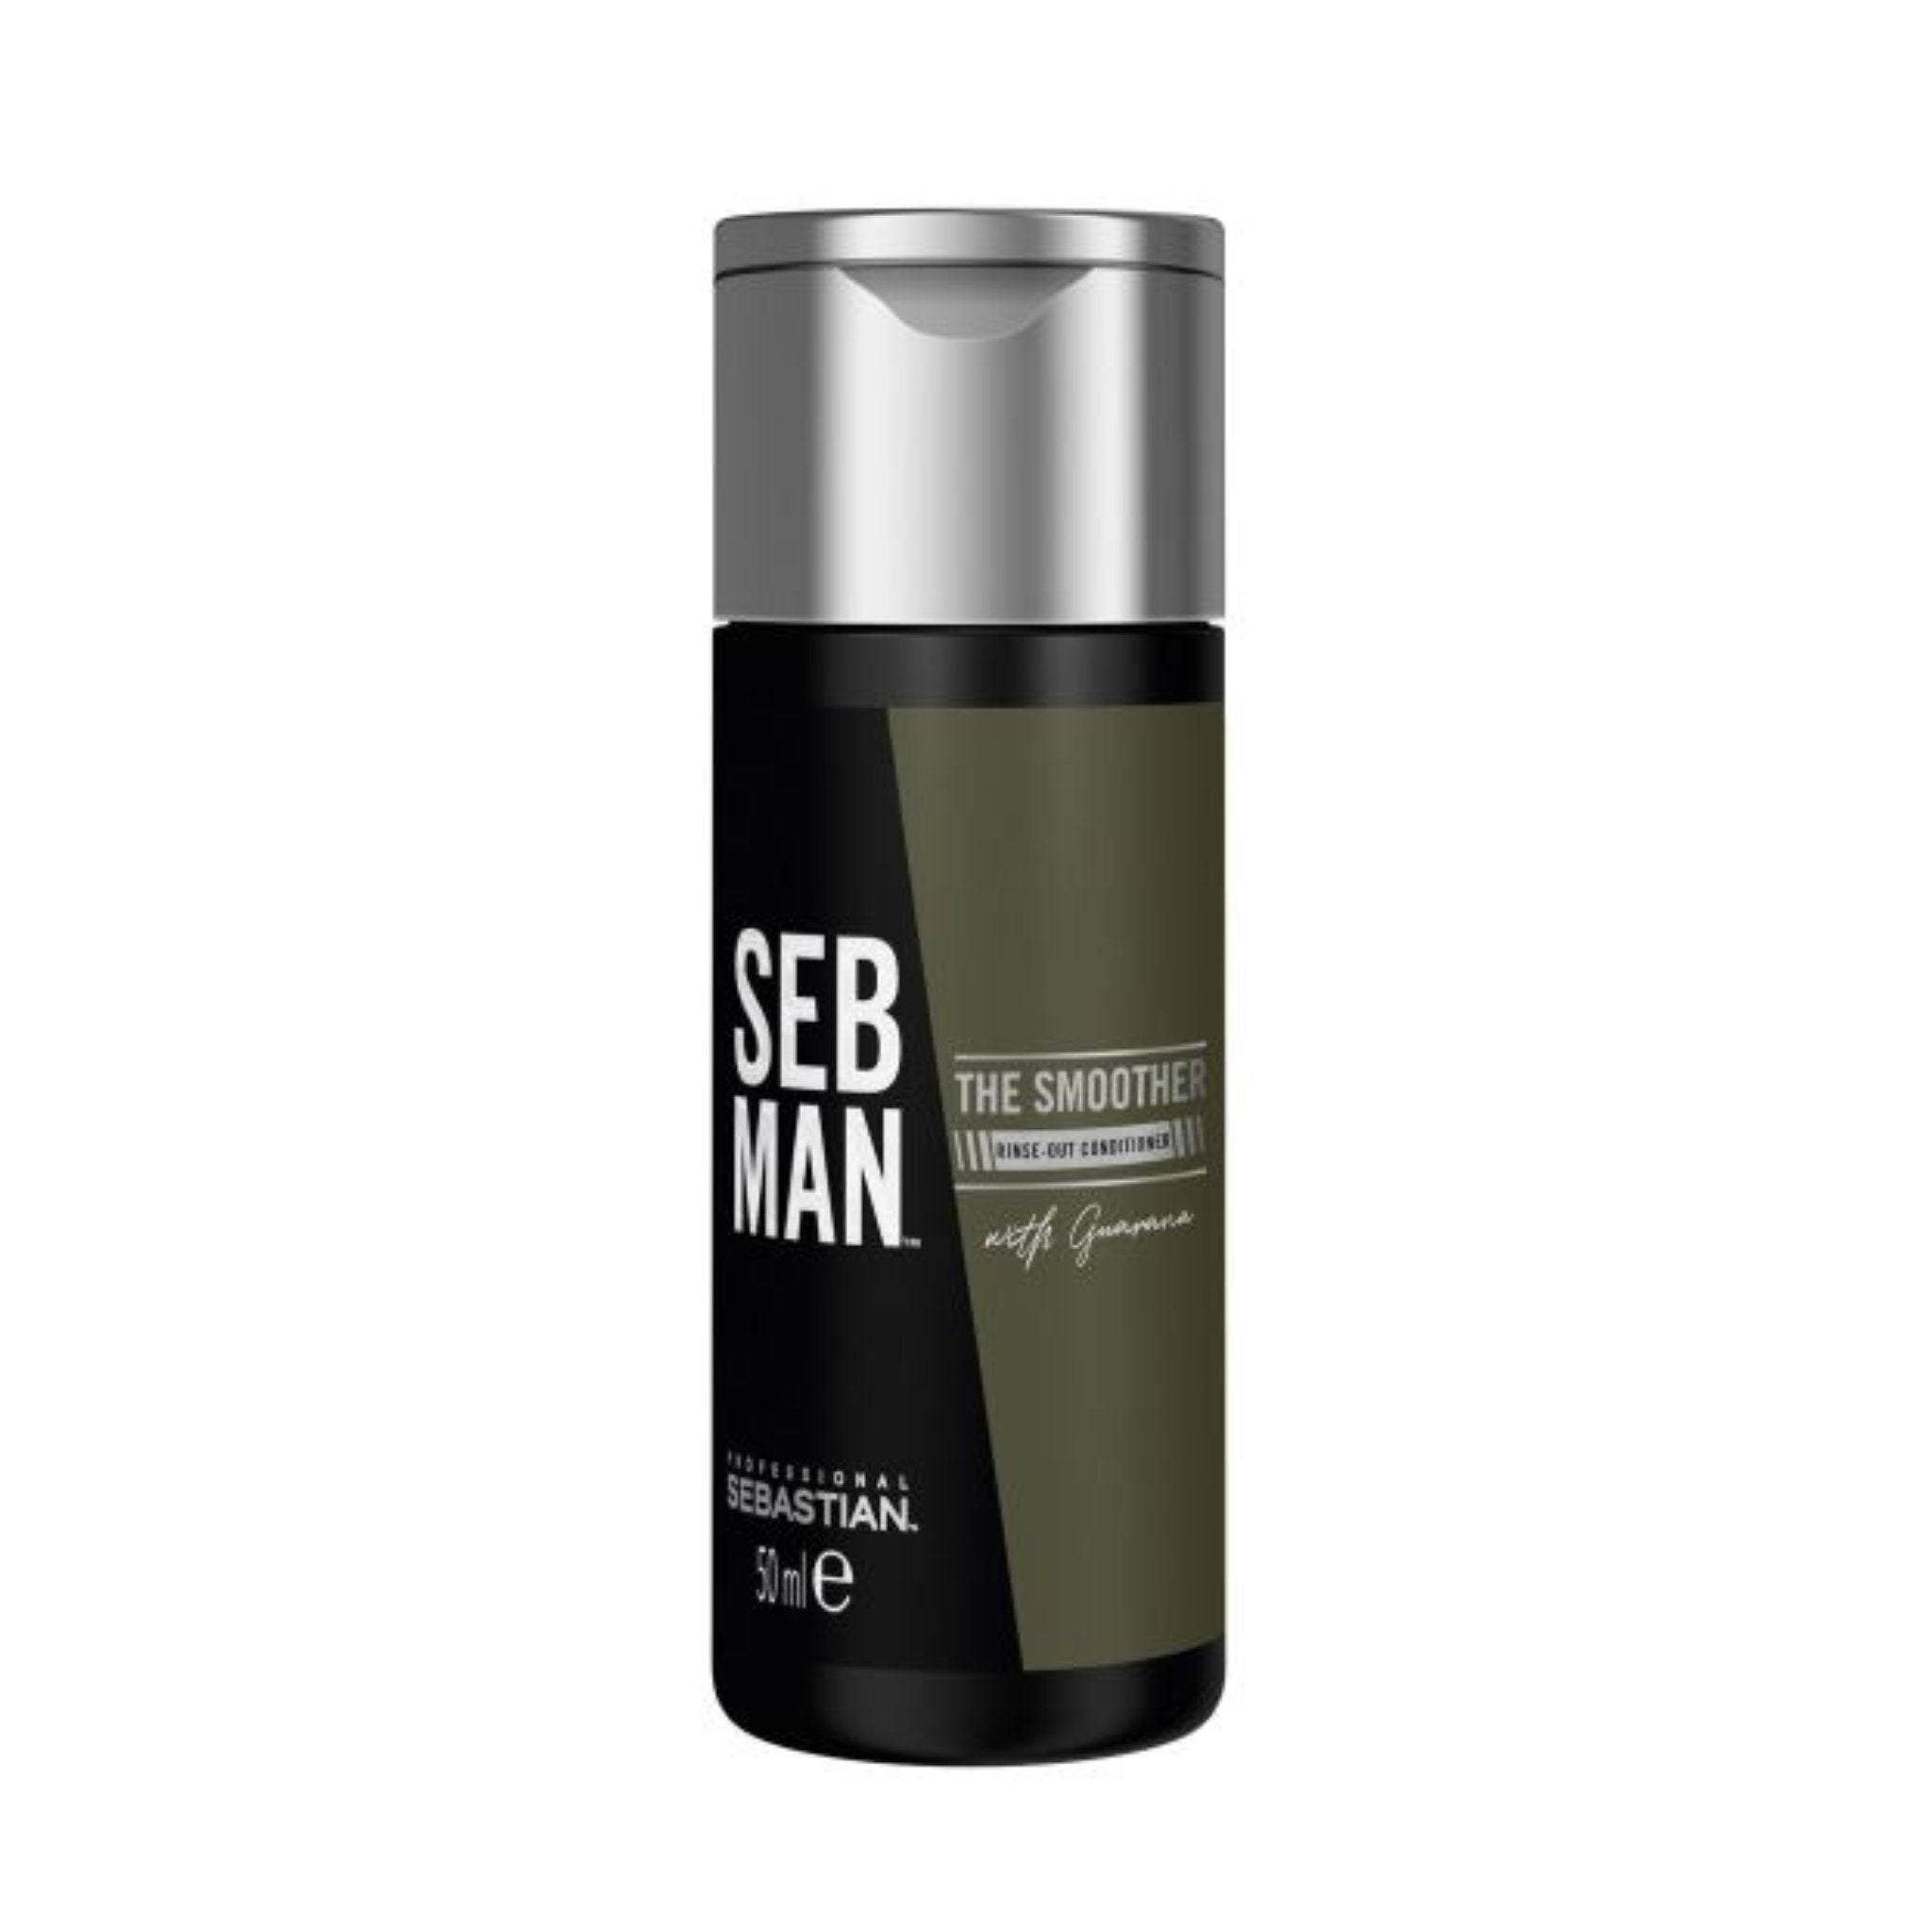 Seb Man. Revitalisant The Smoother - 50 ml - Concept C. Shop